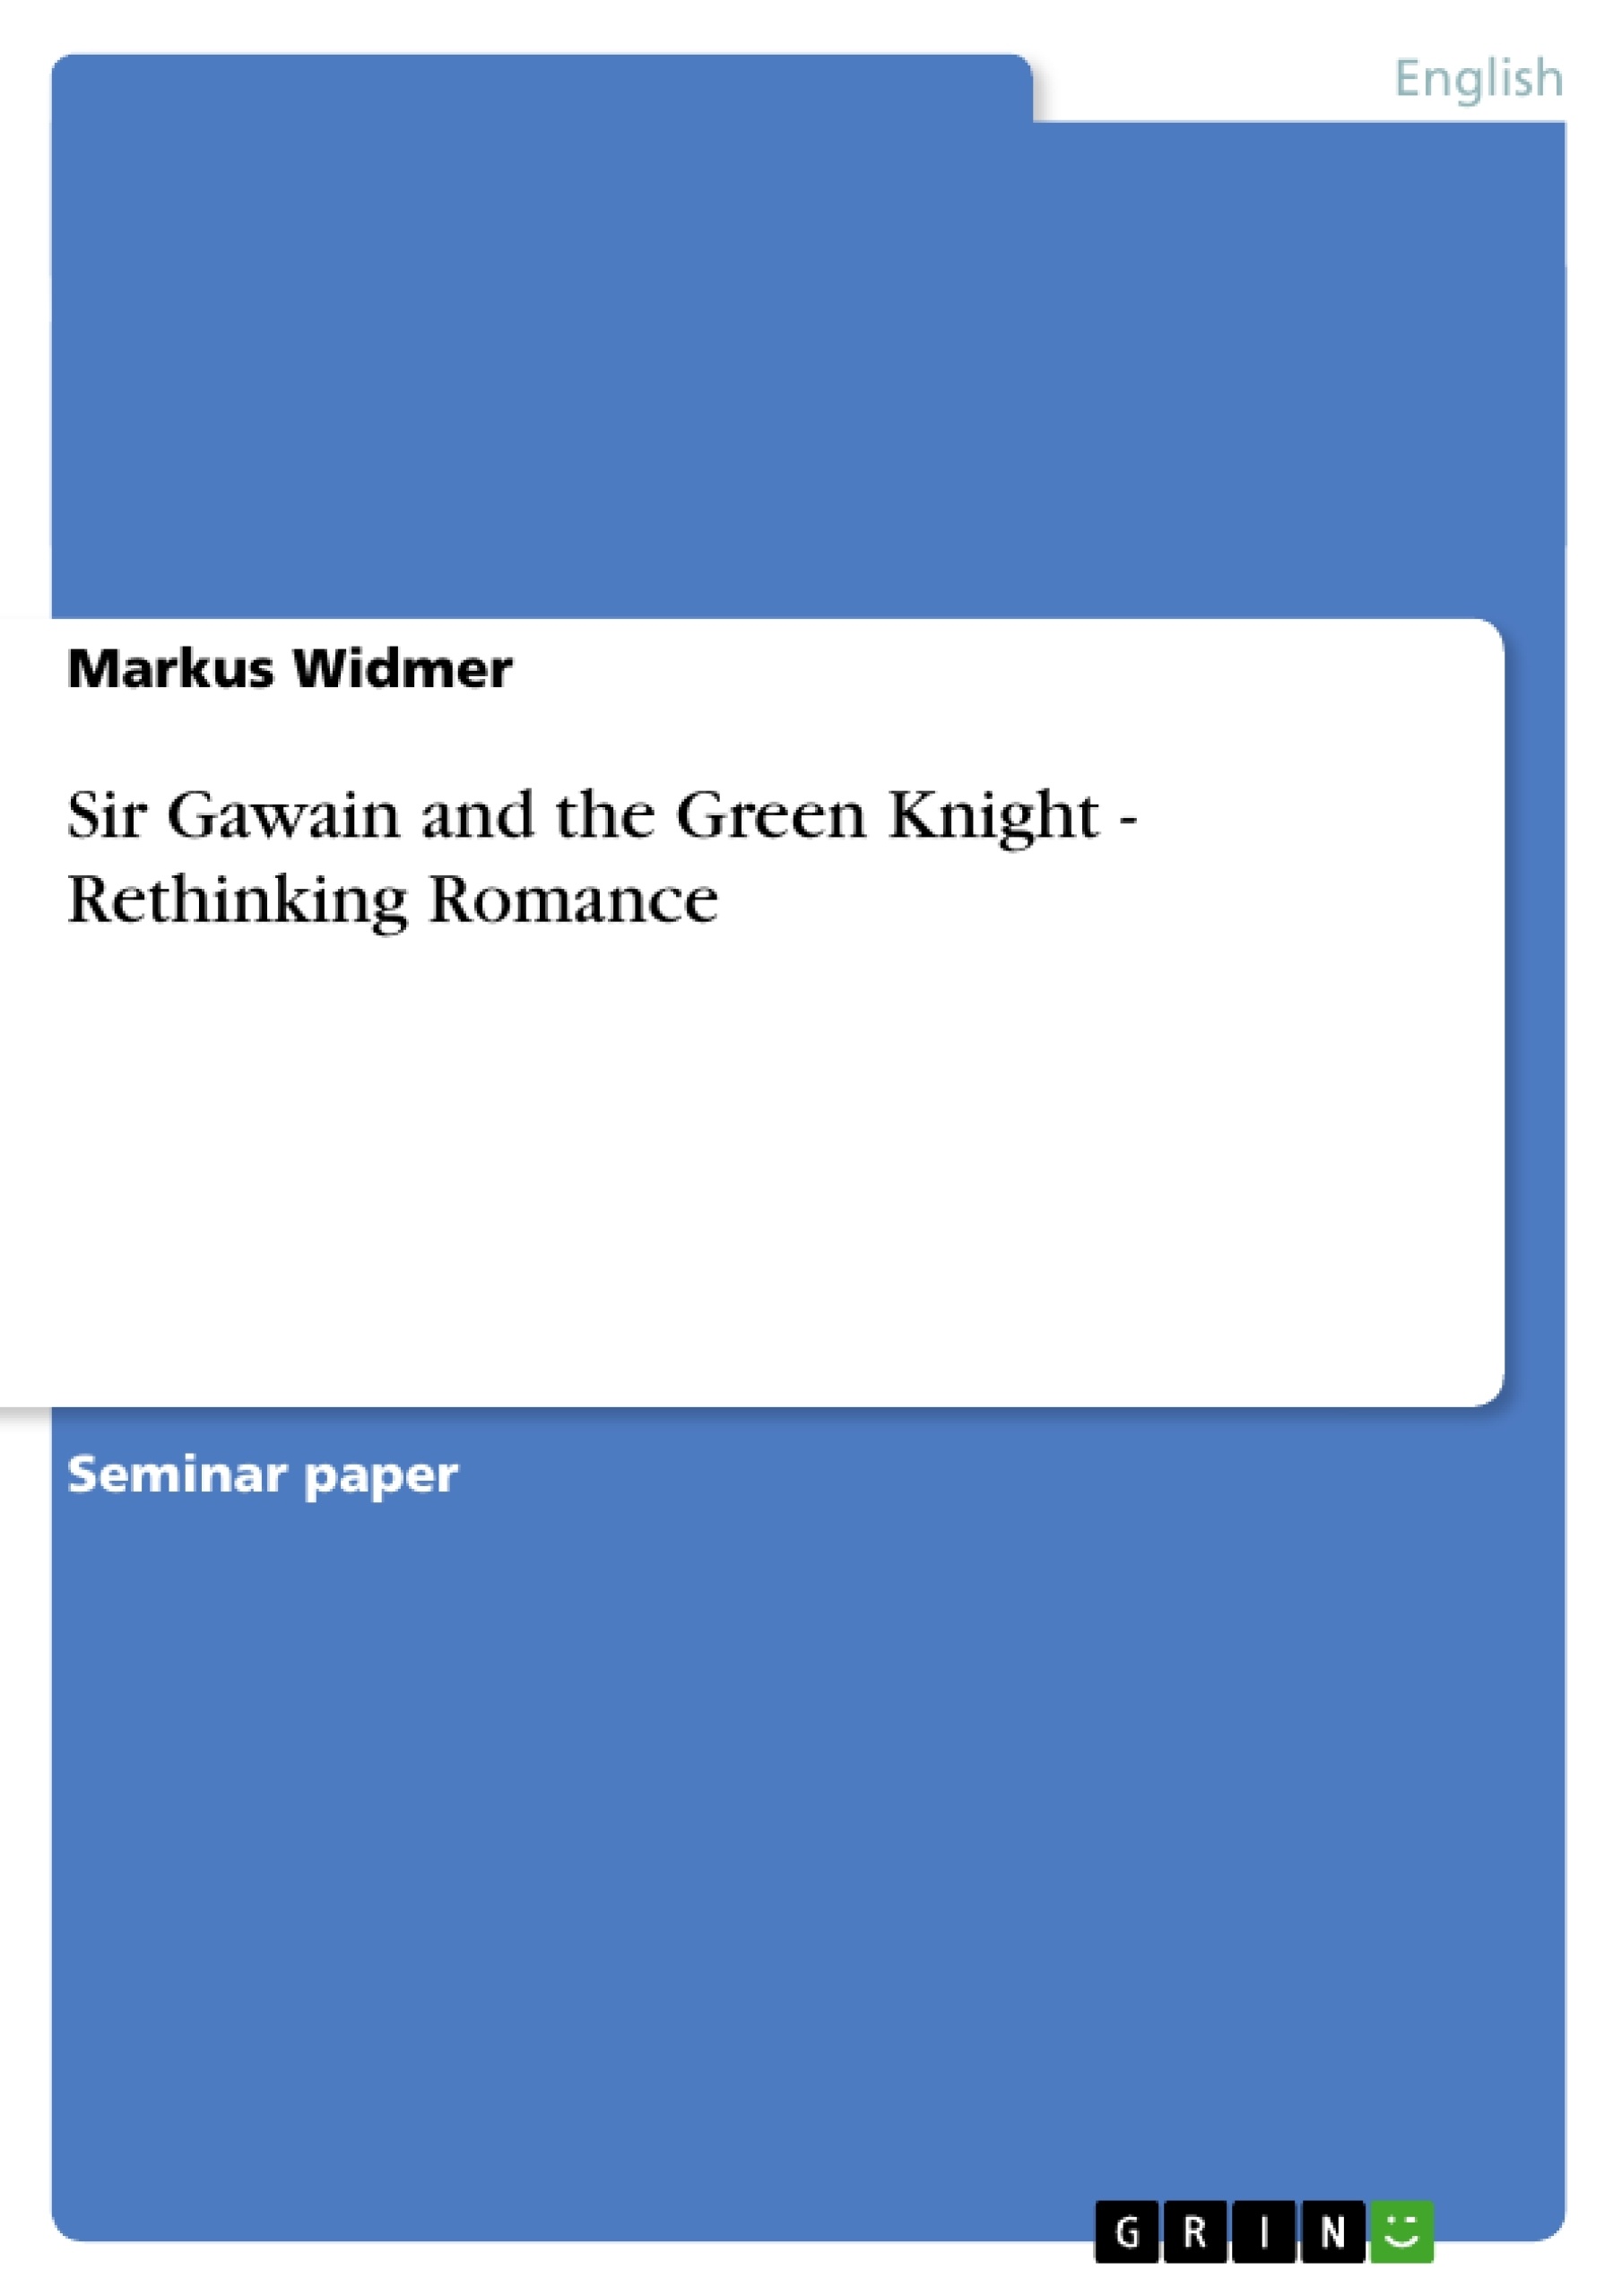 Title: Sir Gawain and the Green Knight - Rethinking Romance